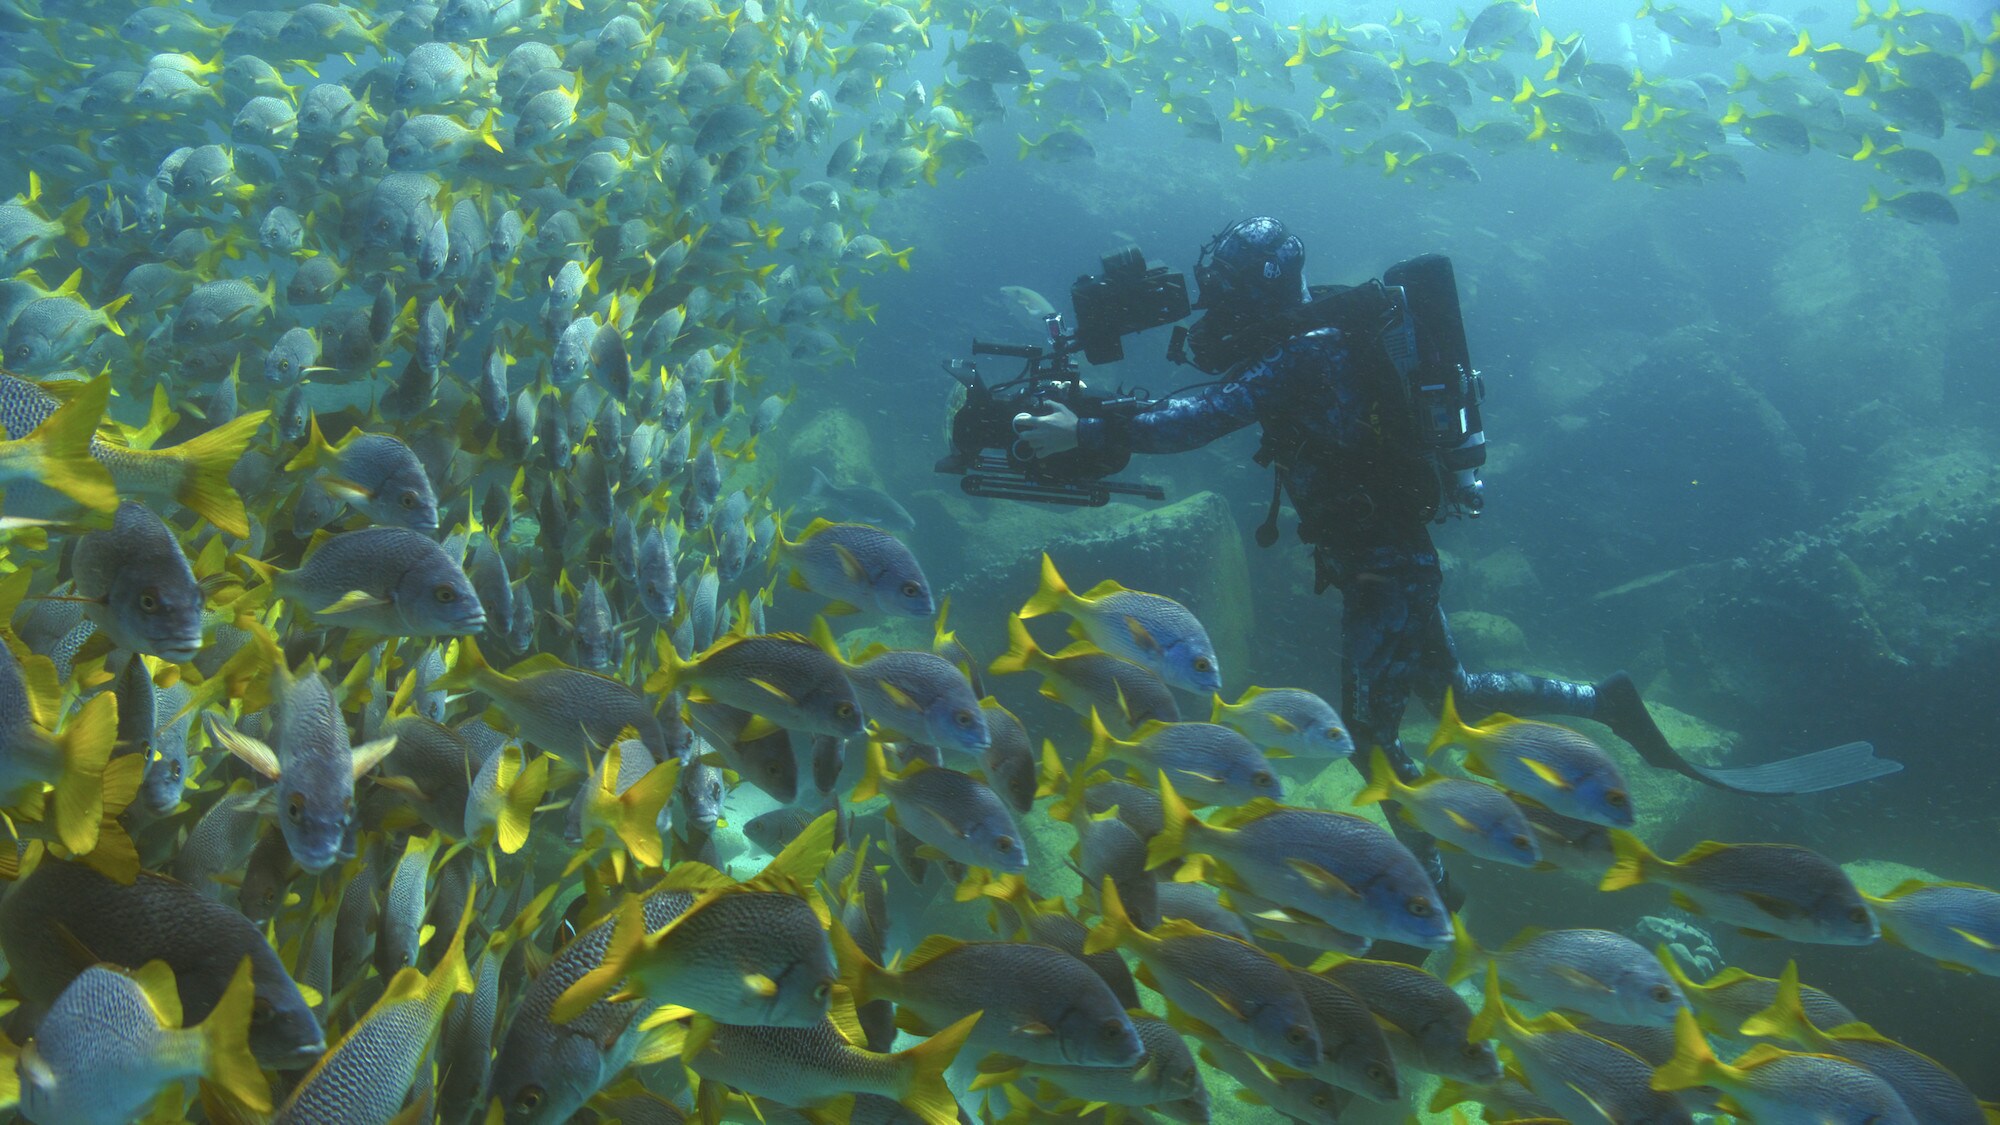 Bertie Gregory filming amongst a large shoal of fish. (National Geographic for Disney+/Jeff Hester)